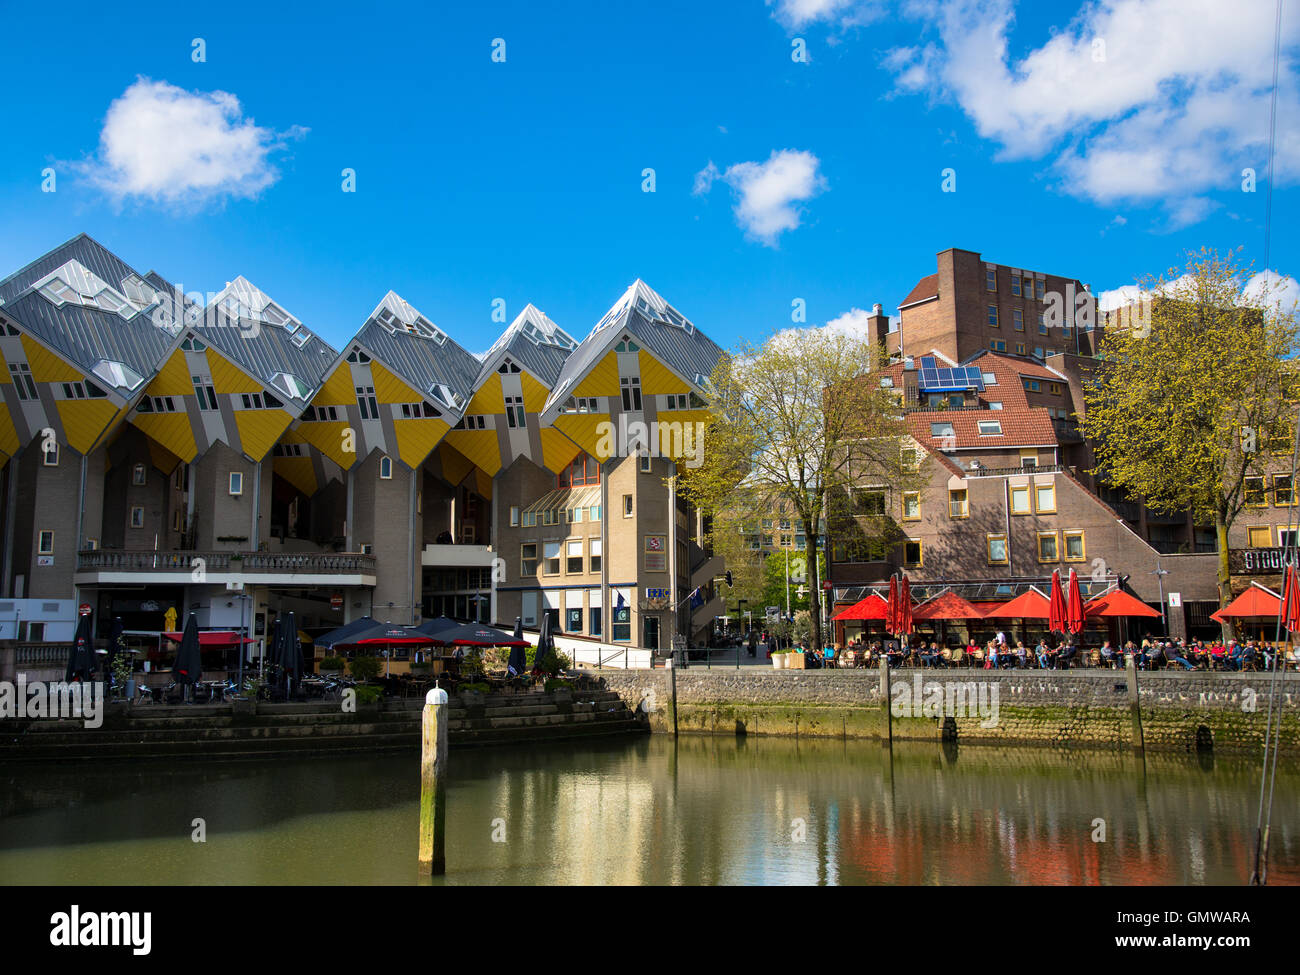 square houses at blaak in rotterdam holland Stock Photo